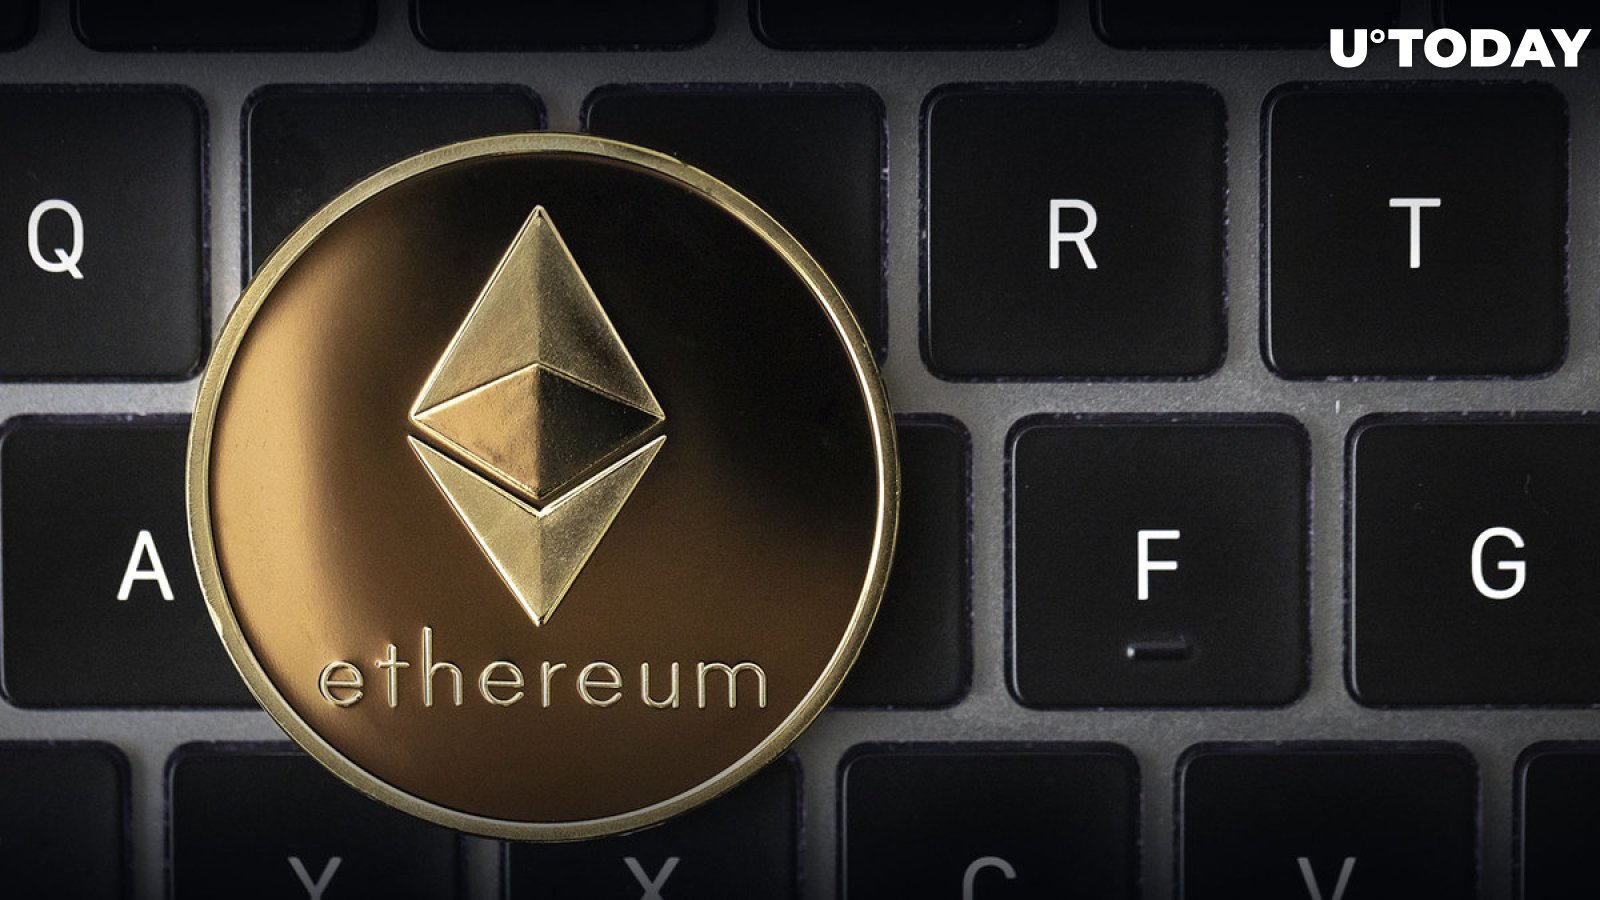 150,000 ETH Staked in Ethereum Deposit Contract: Details